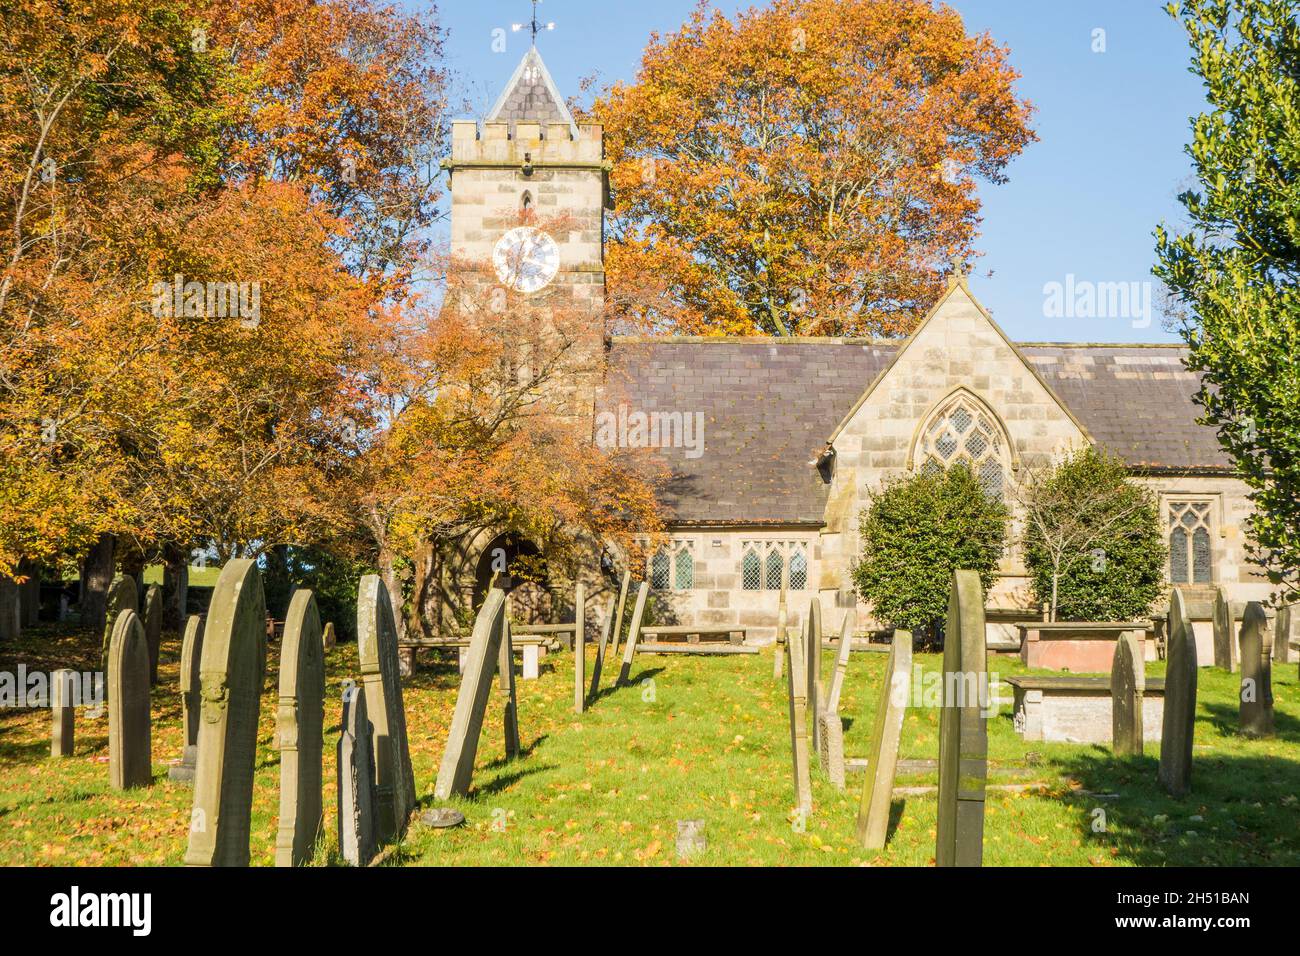 St Peter's parish Church churchyard and gravestones in the Autumn in the Cheshire village of Delamere, Stock Photo